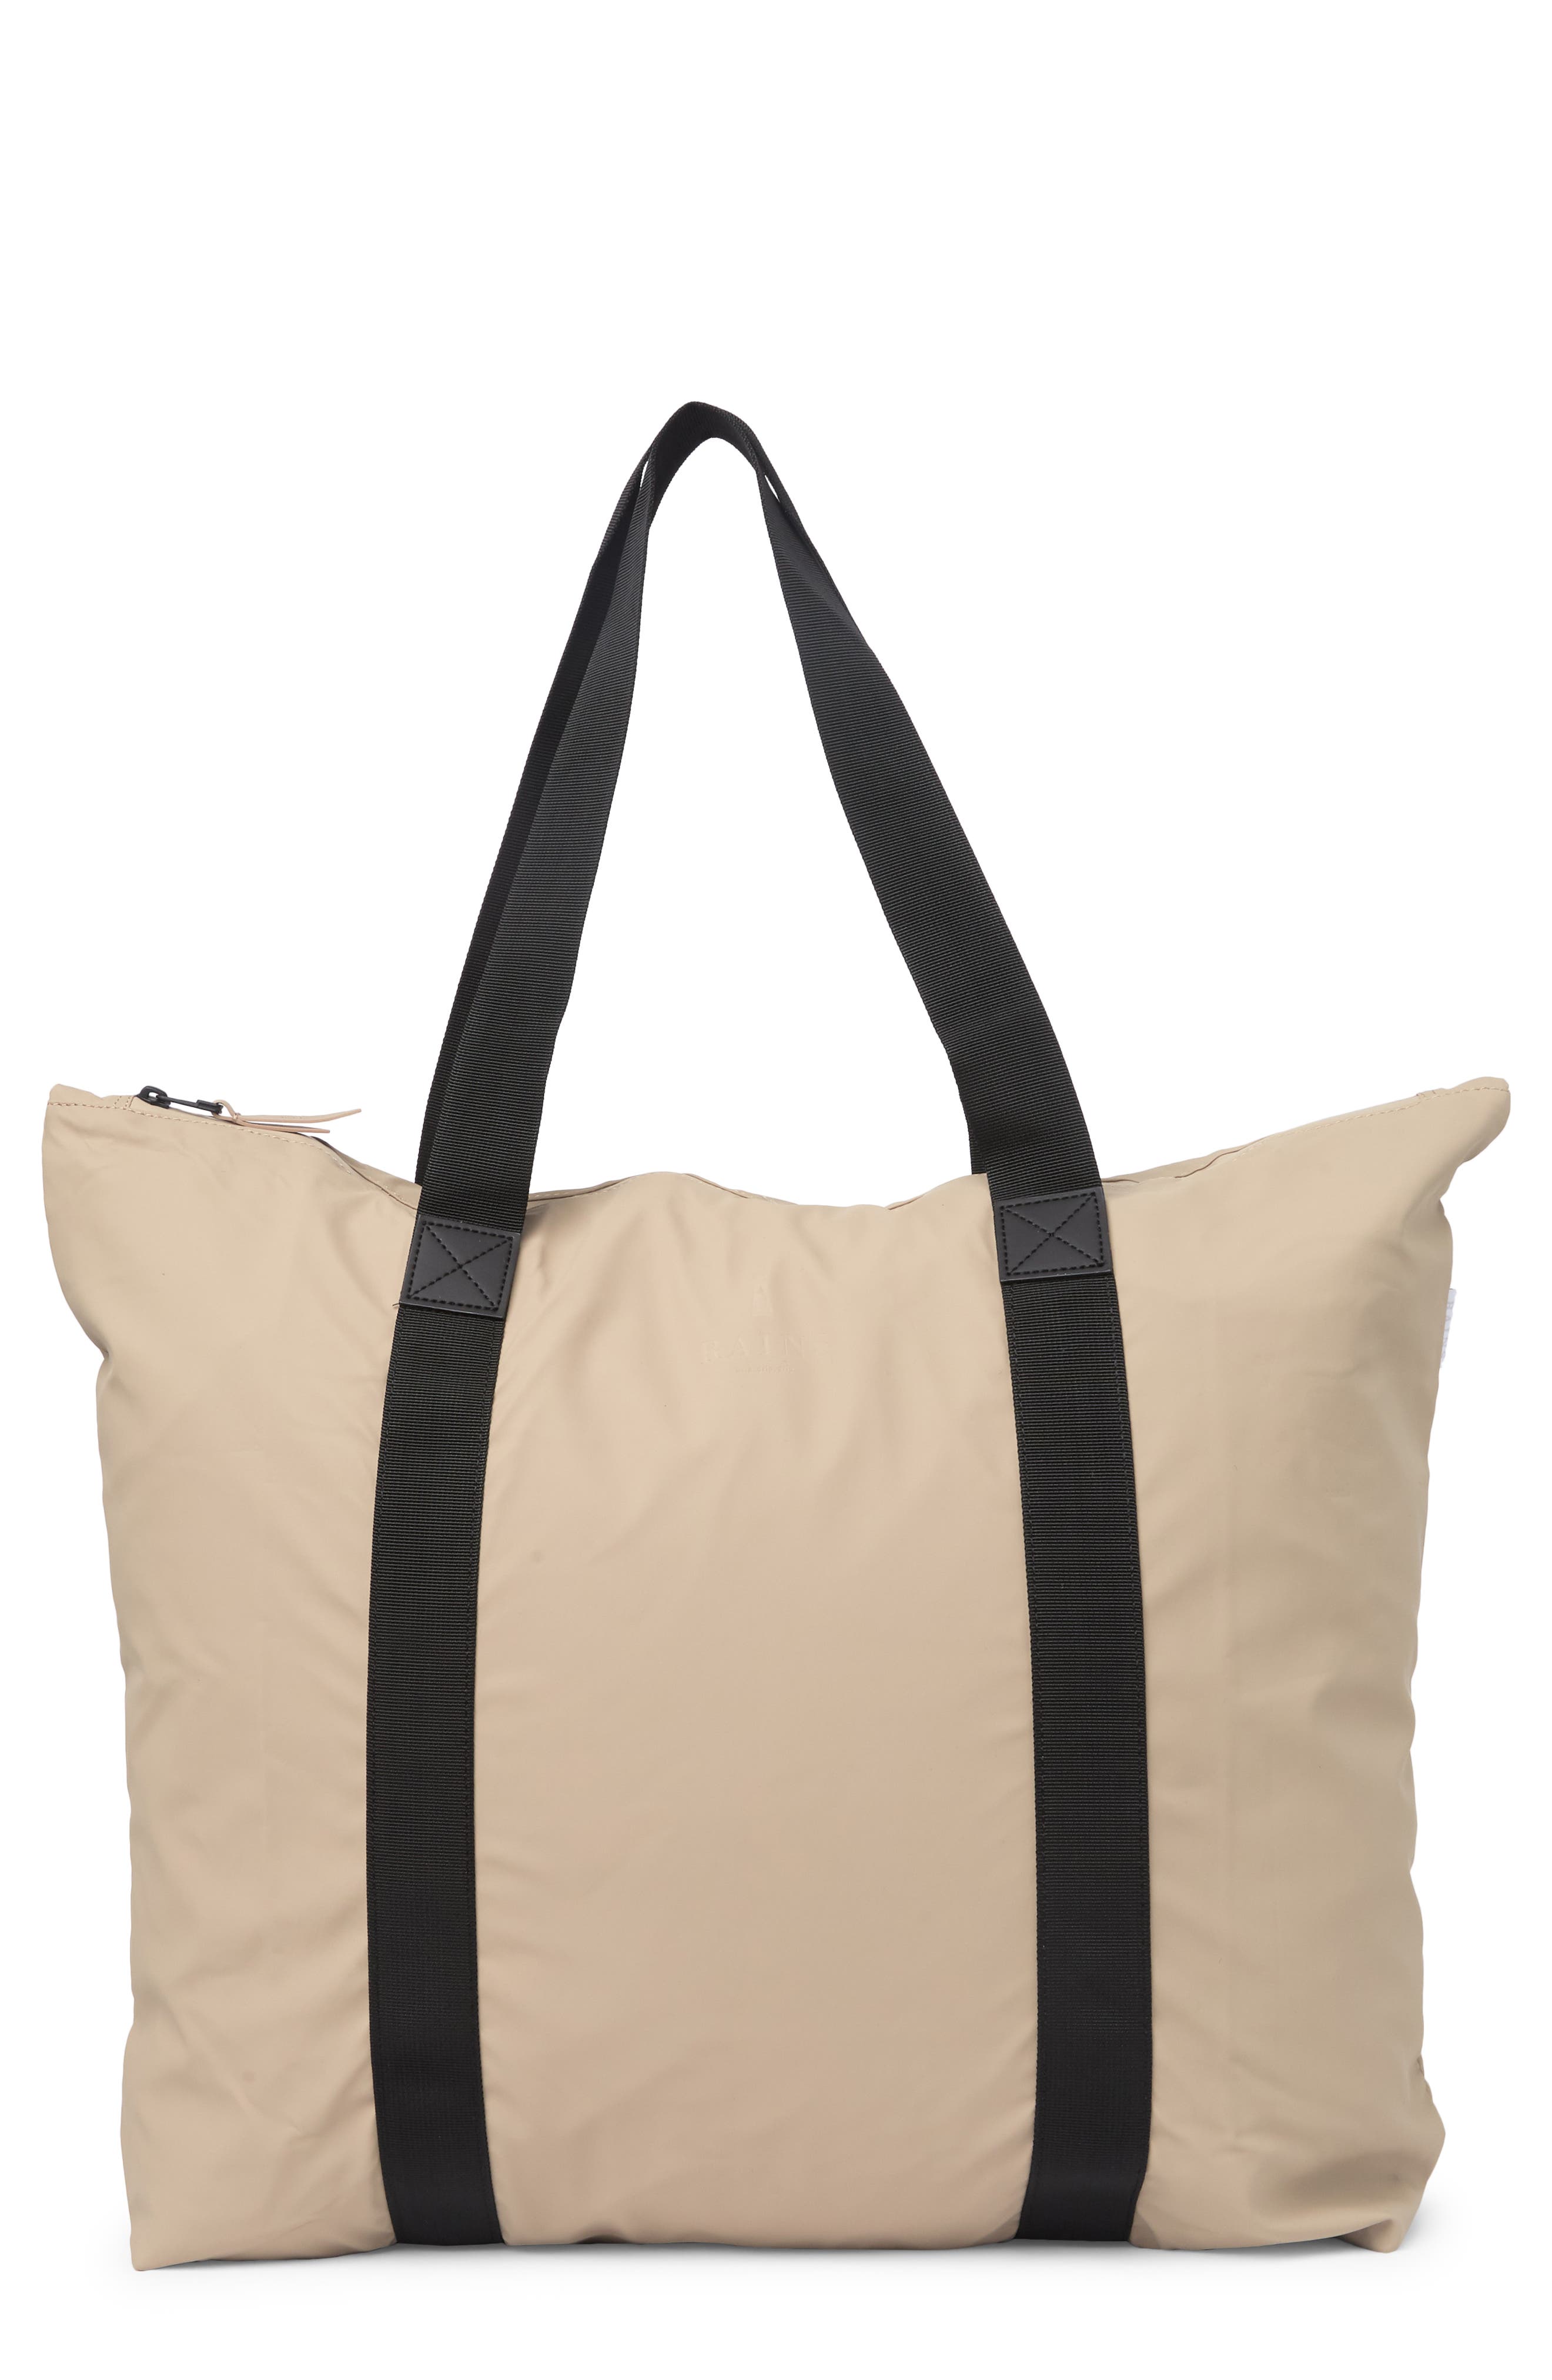 Rains All-weather Tote Bag In Light Beige2